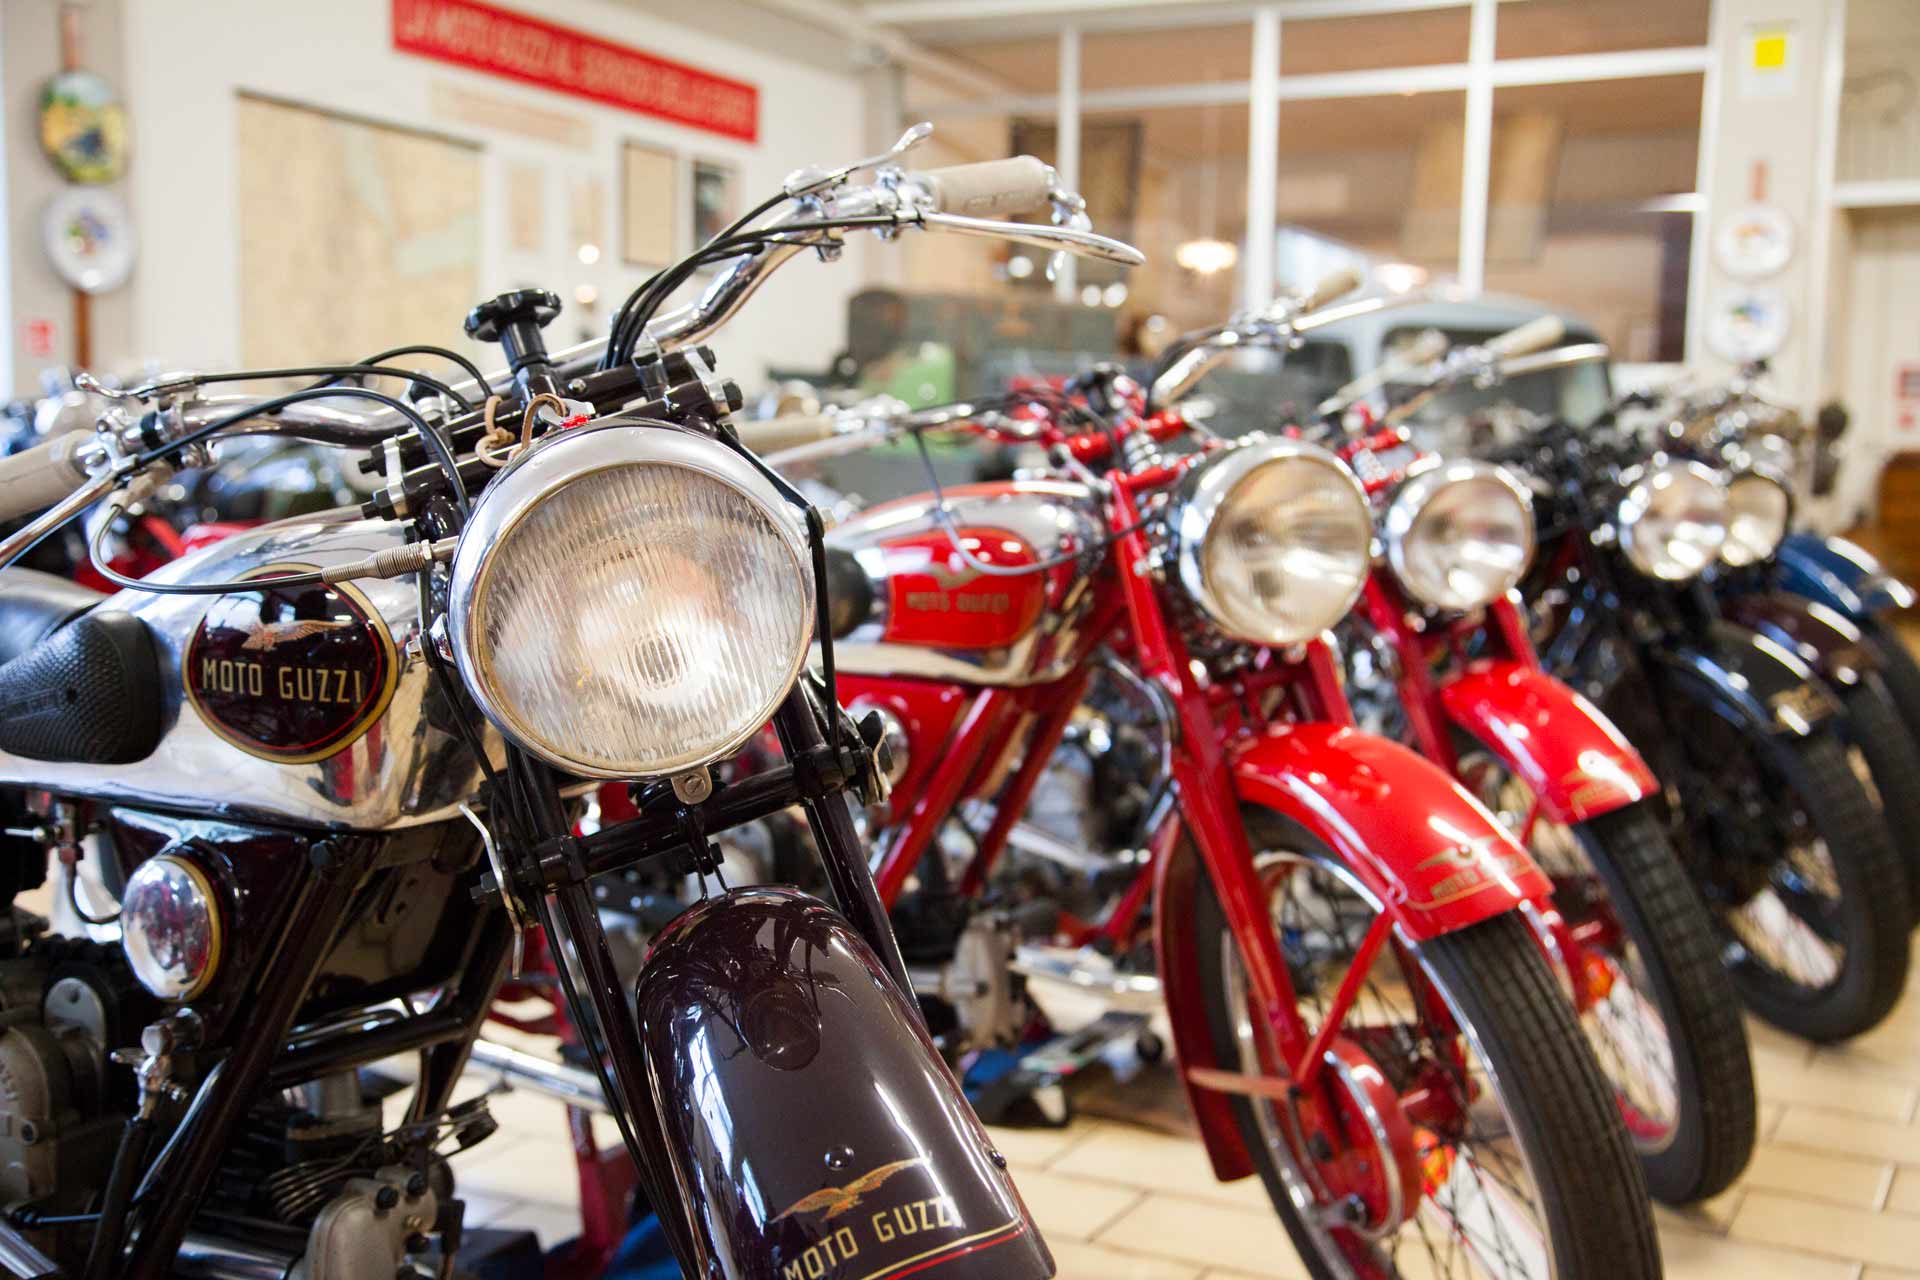 Motorvalley private car motorcycles collections